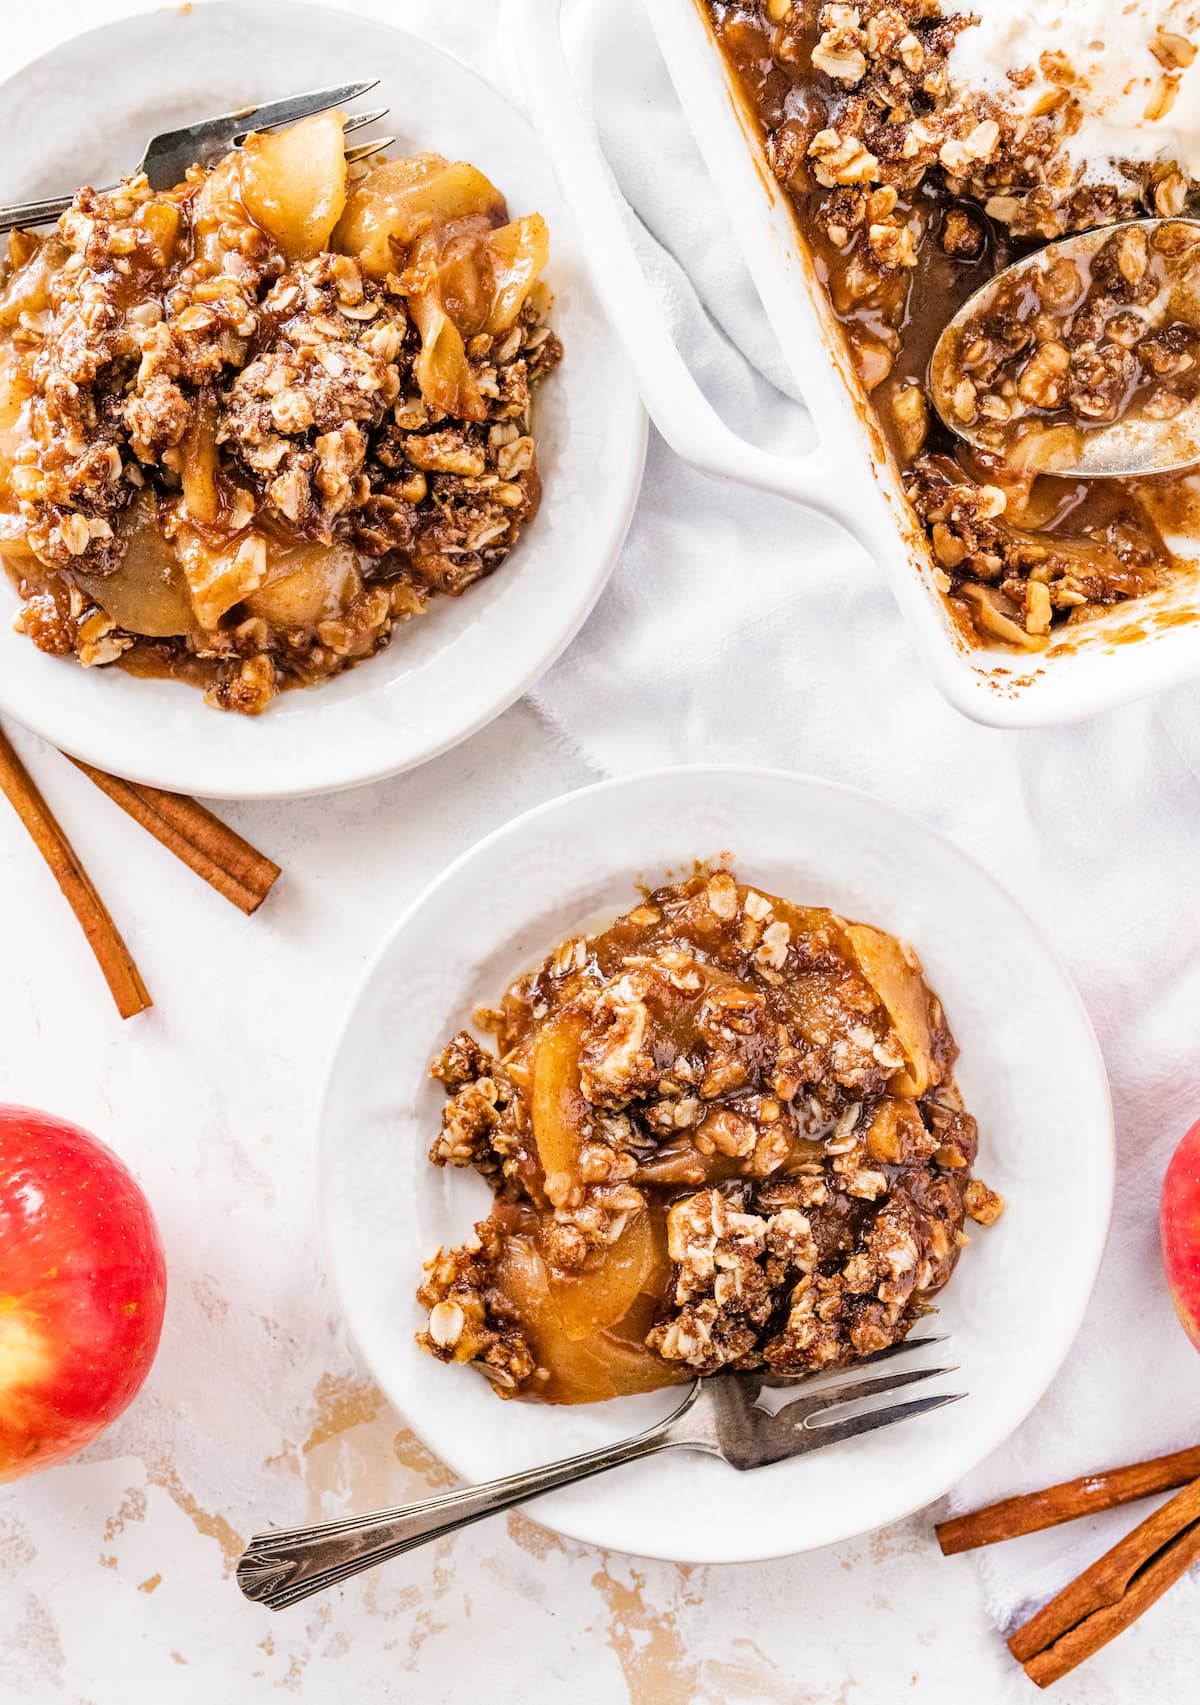 Two servings of apple crisp with forks.